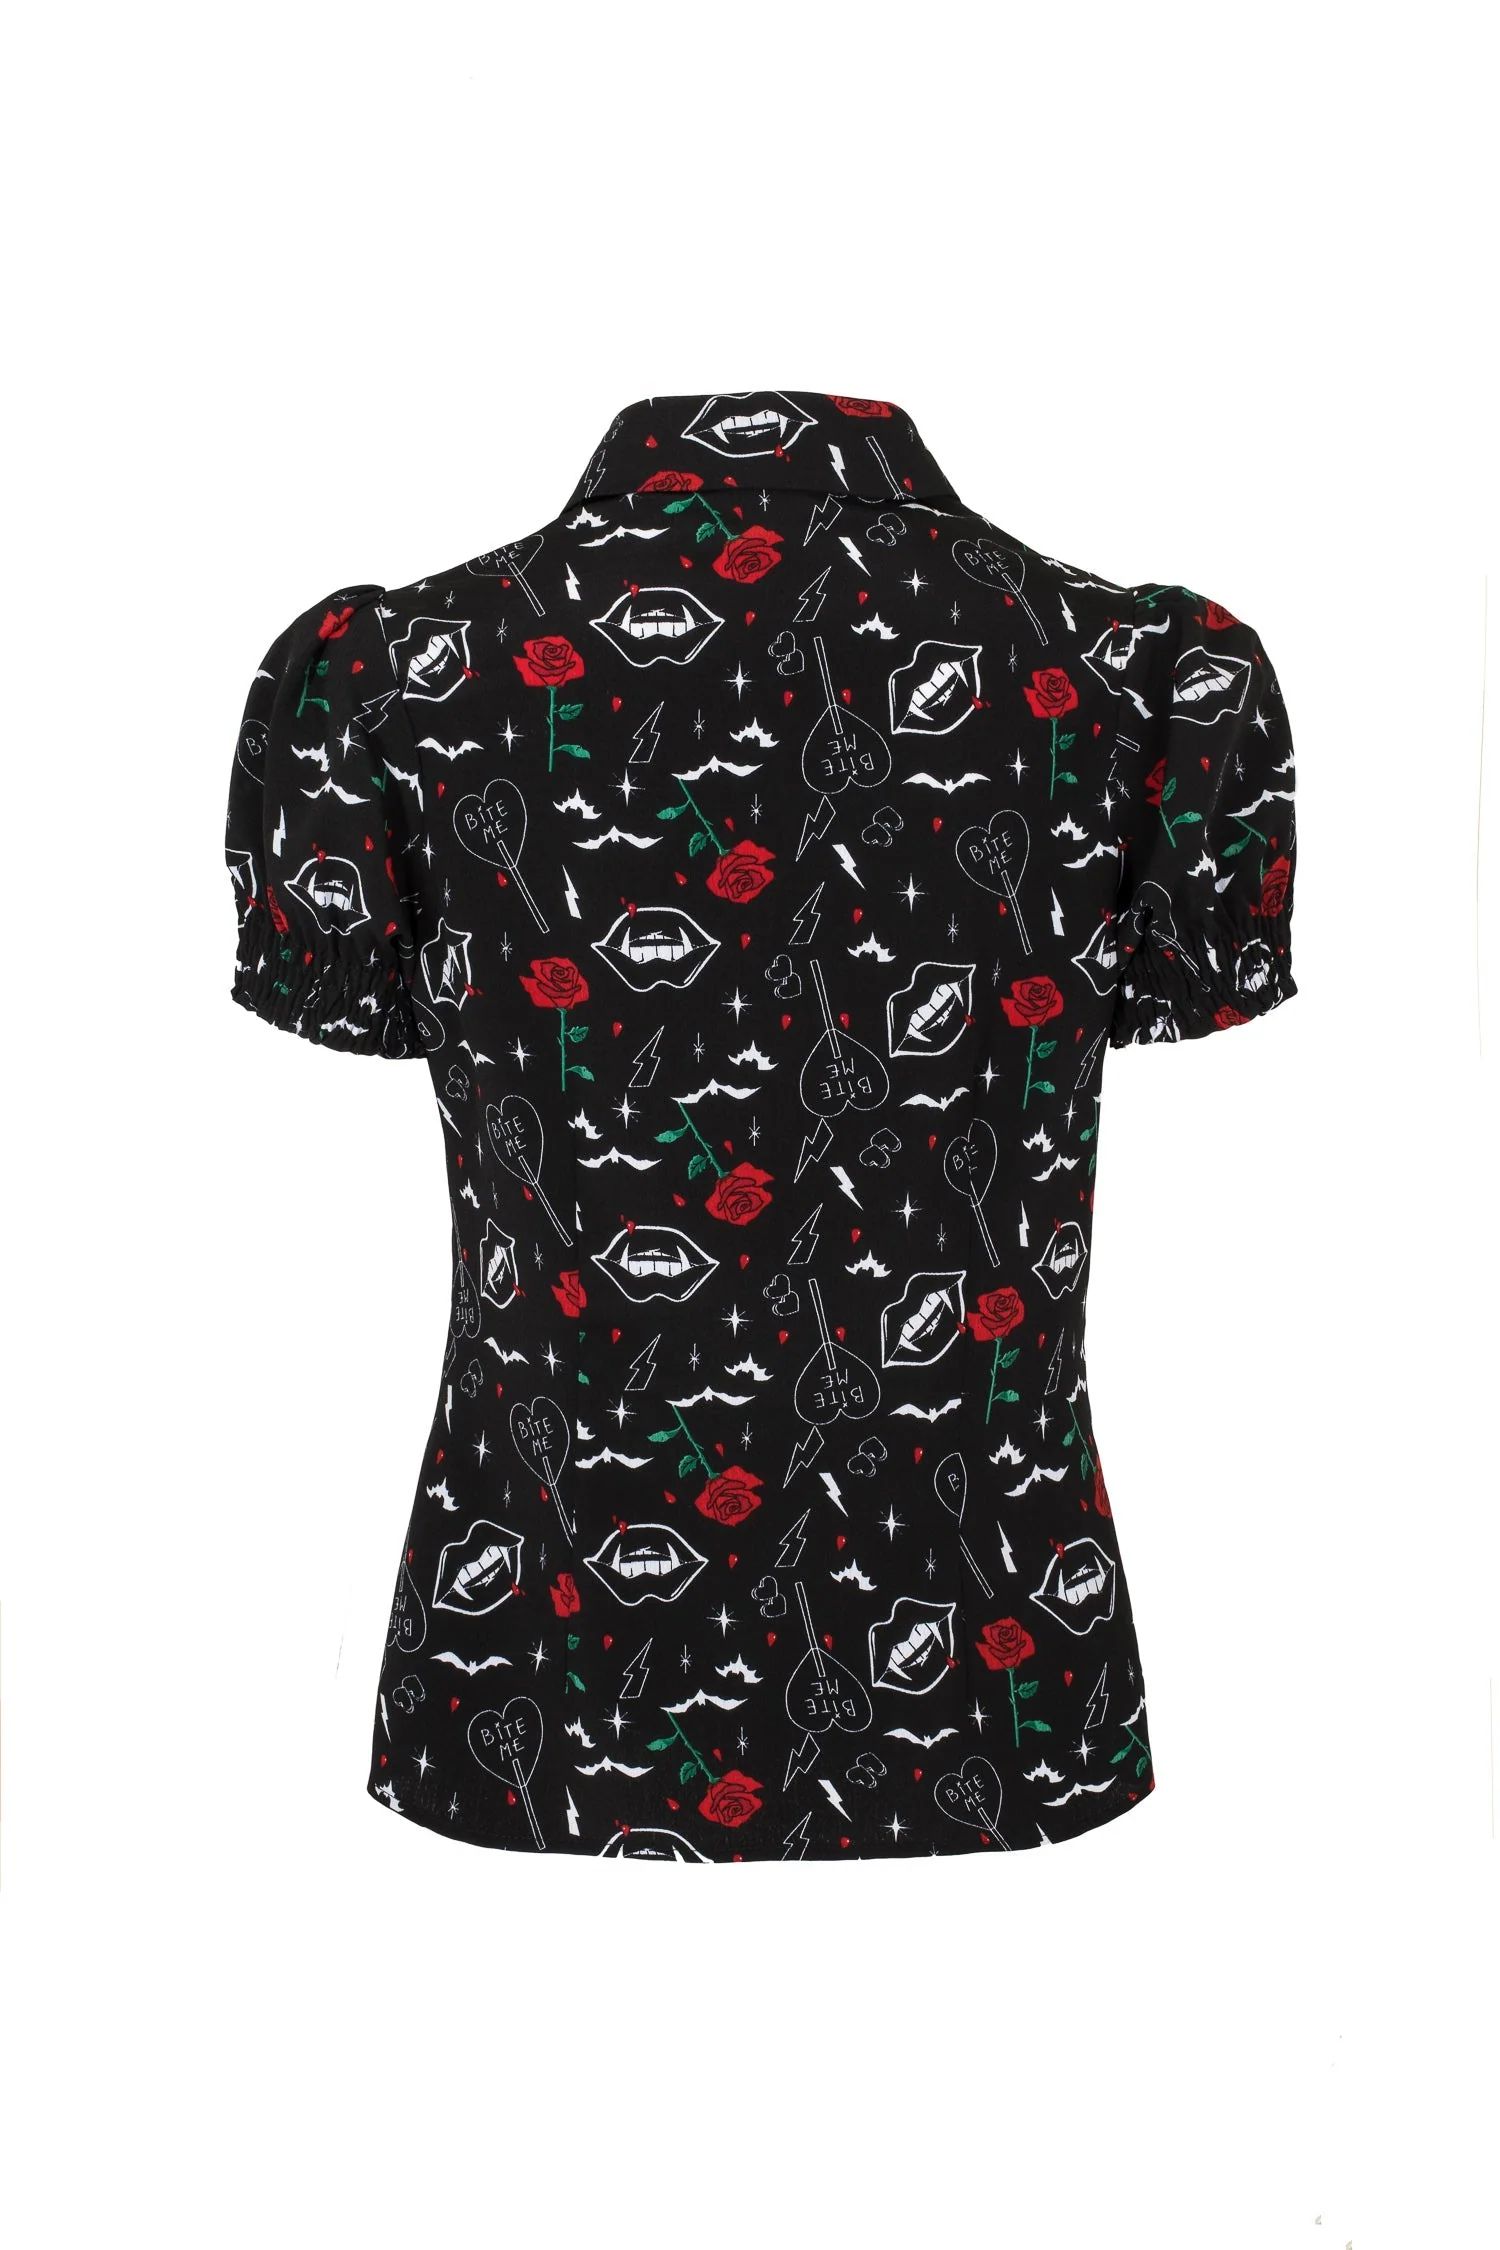 PS60276bbbbb-chemisier-blouse-robe-gothique-rock-hell-bunny-lilith